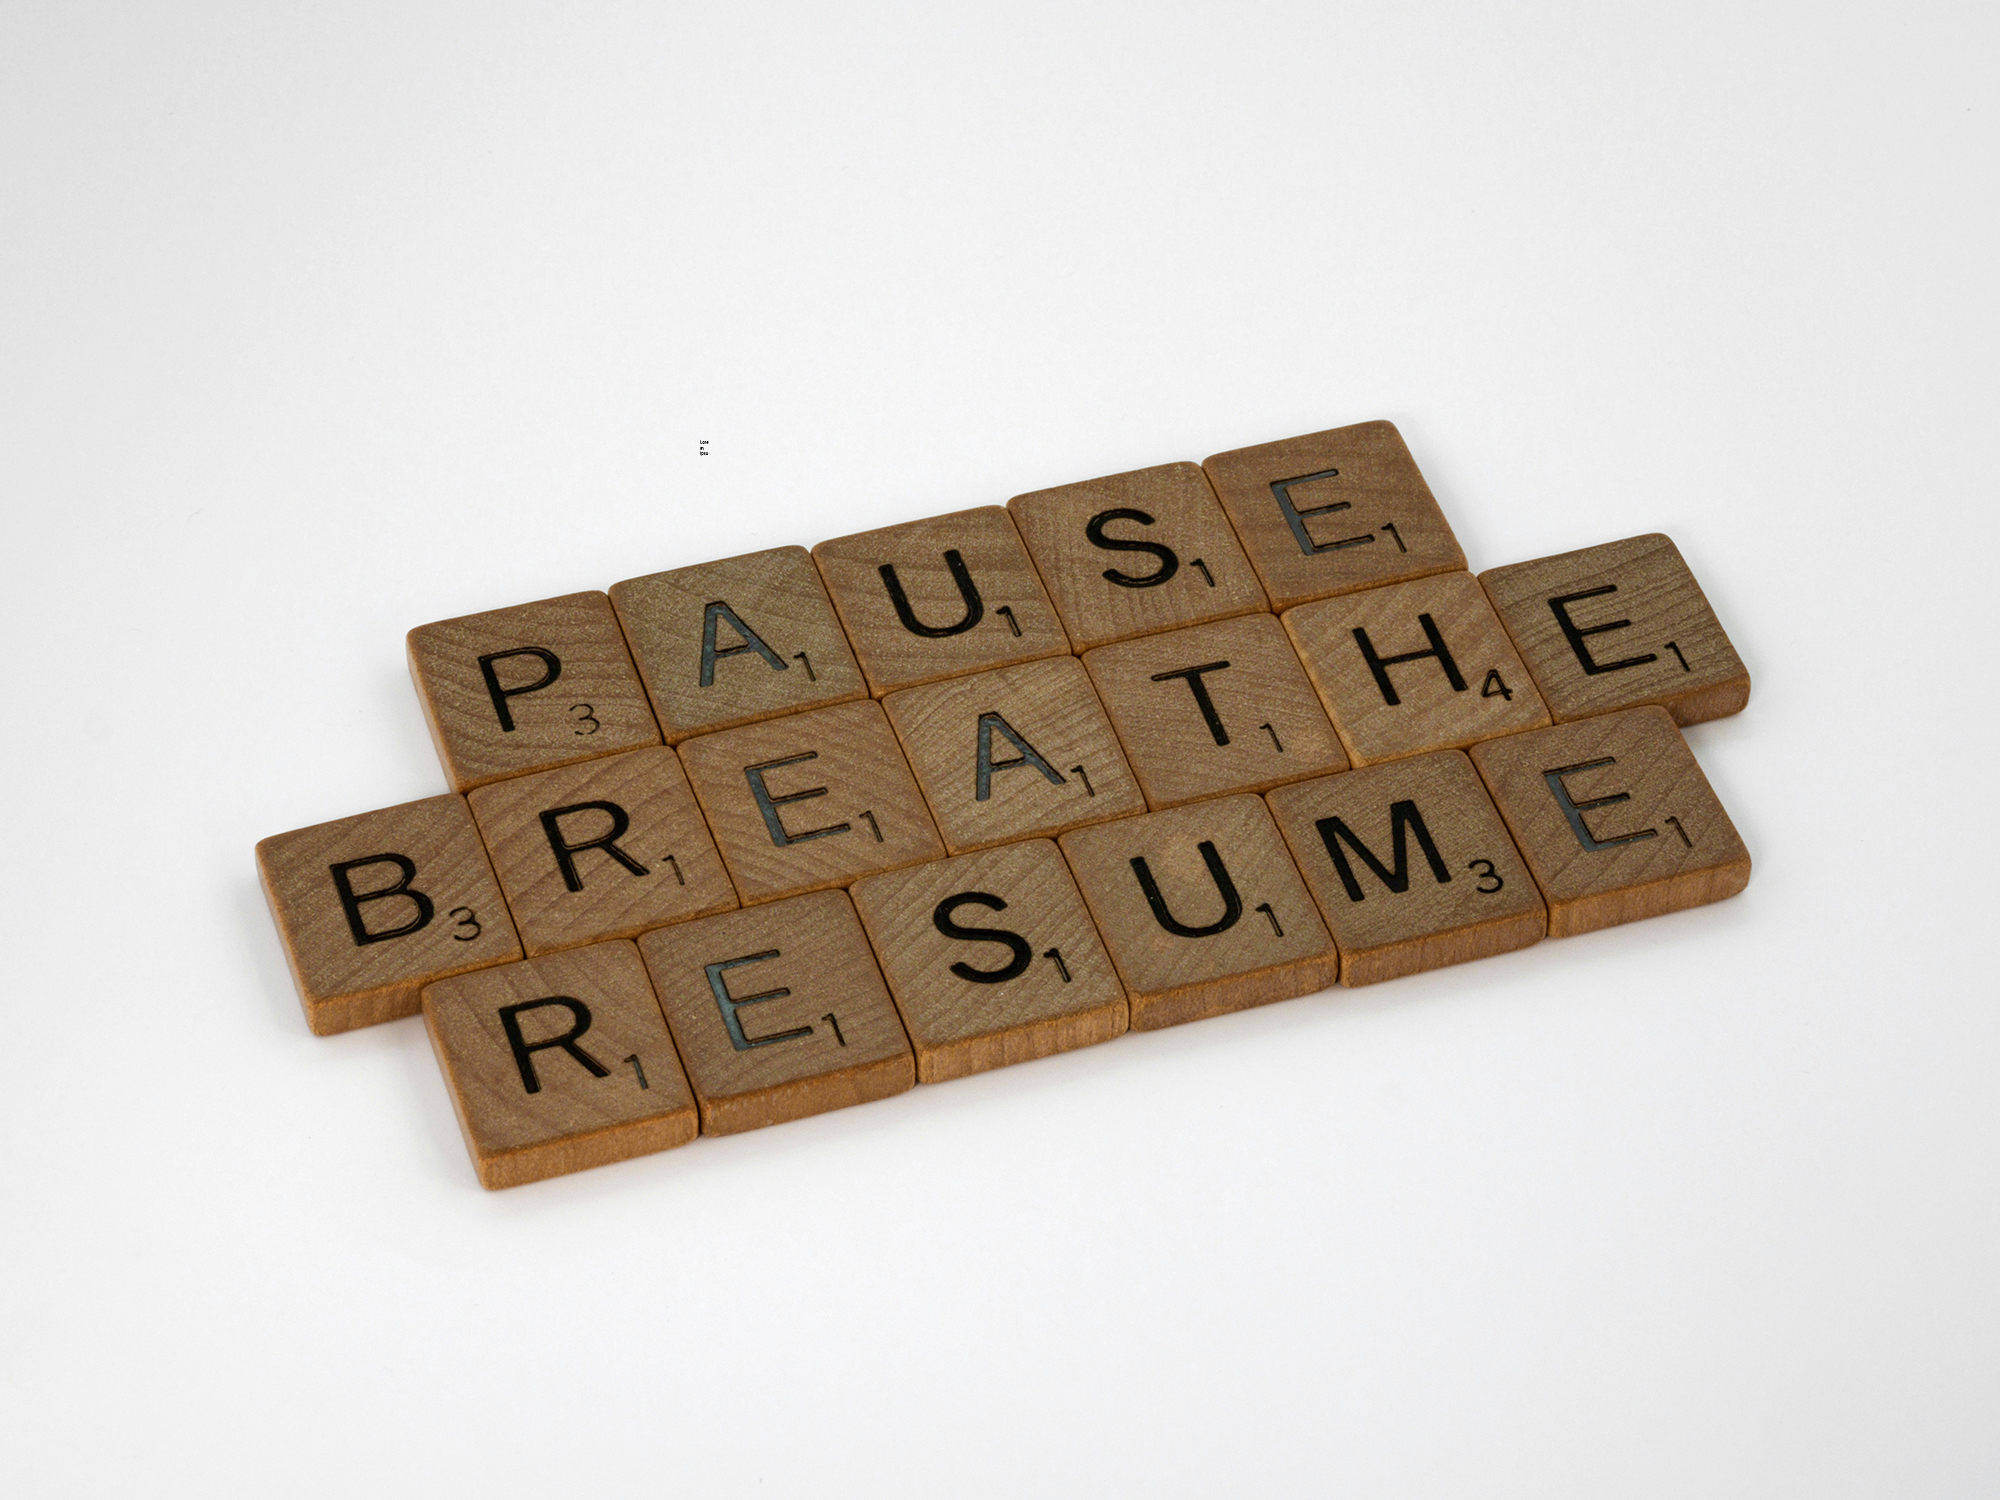 Wooden Scarbble tiles that says "Pause, Breathe, Resume".